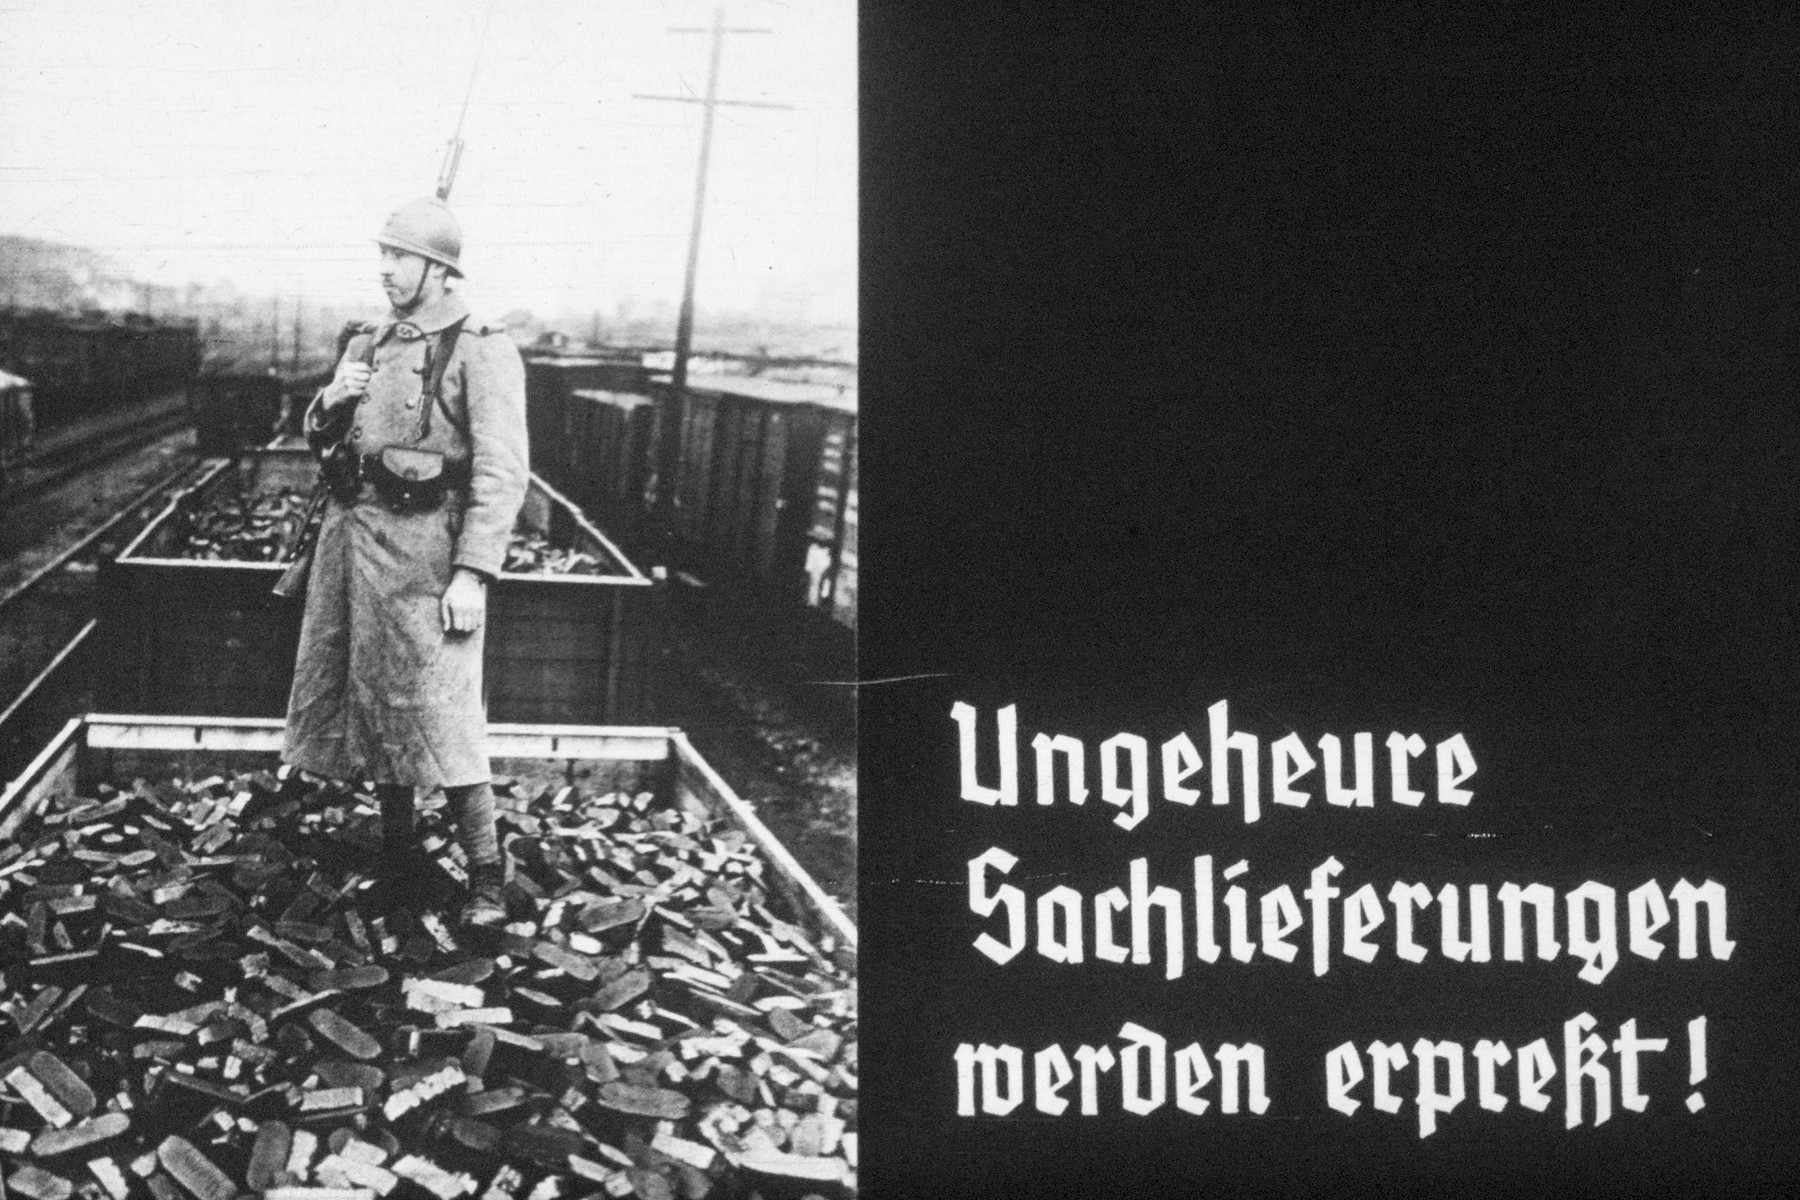 24th slide from a Hitler Youth slideshow about the aftermath of WWI, Versailles, how it was overcome and the rise of Nazism.

Ungeheure Sachlieferungen werden erpresst!
//
Sachlieferungen are being blackmailed!